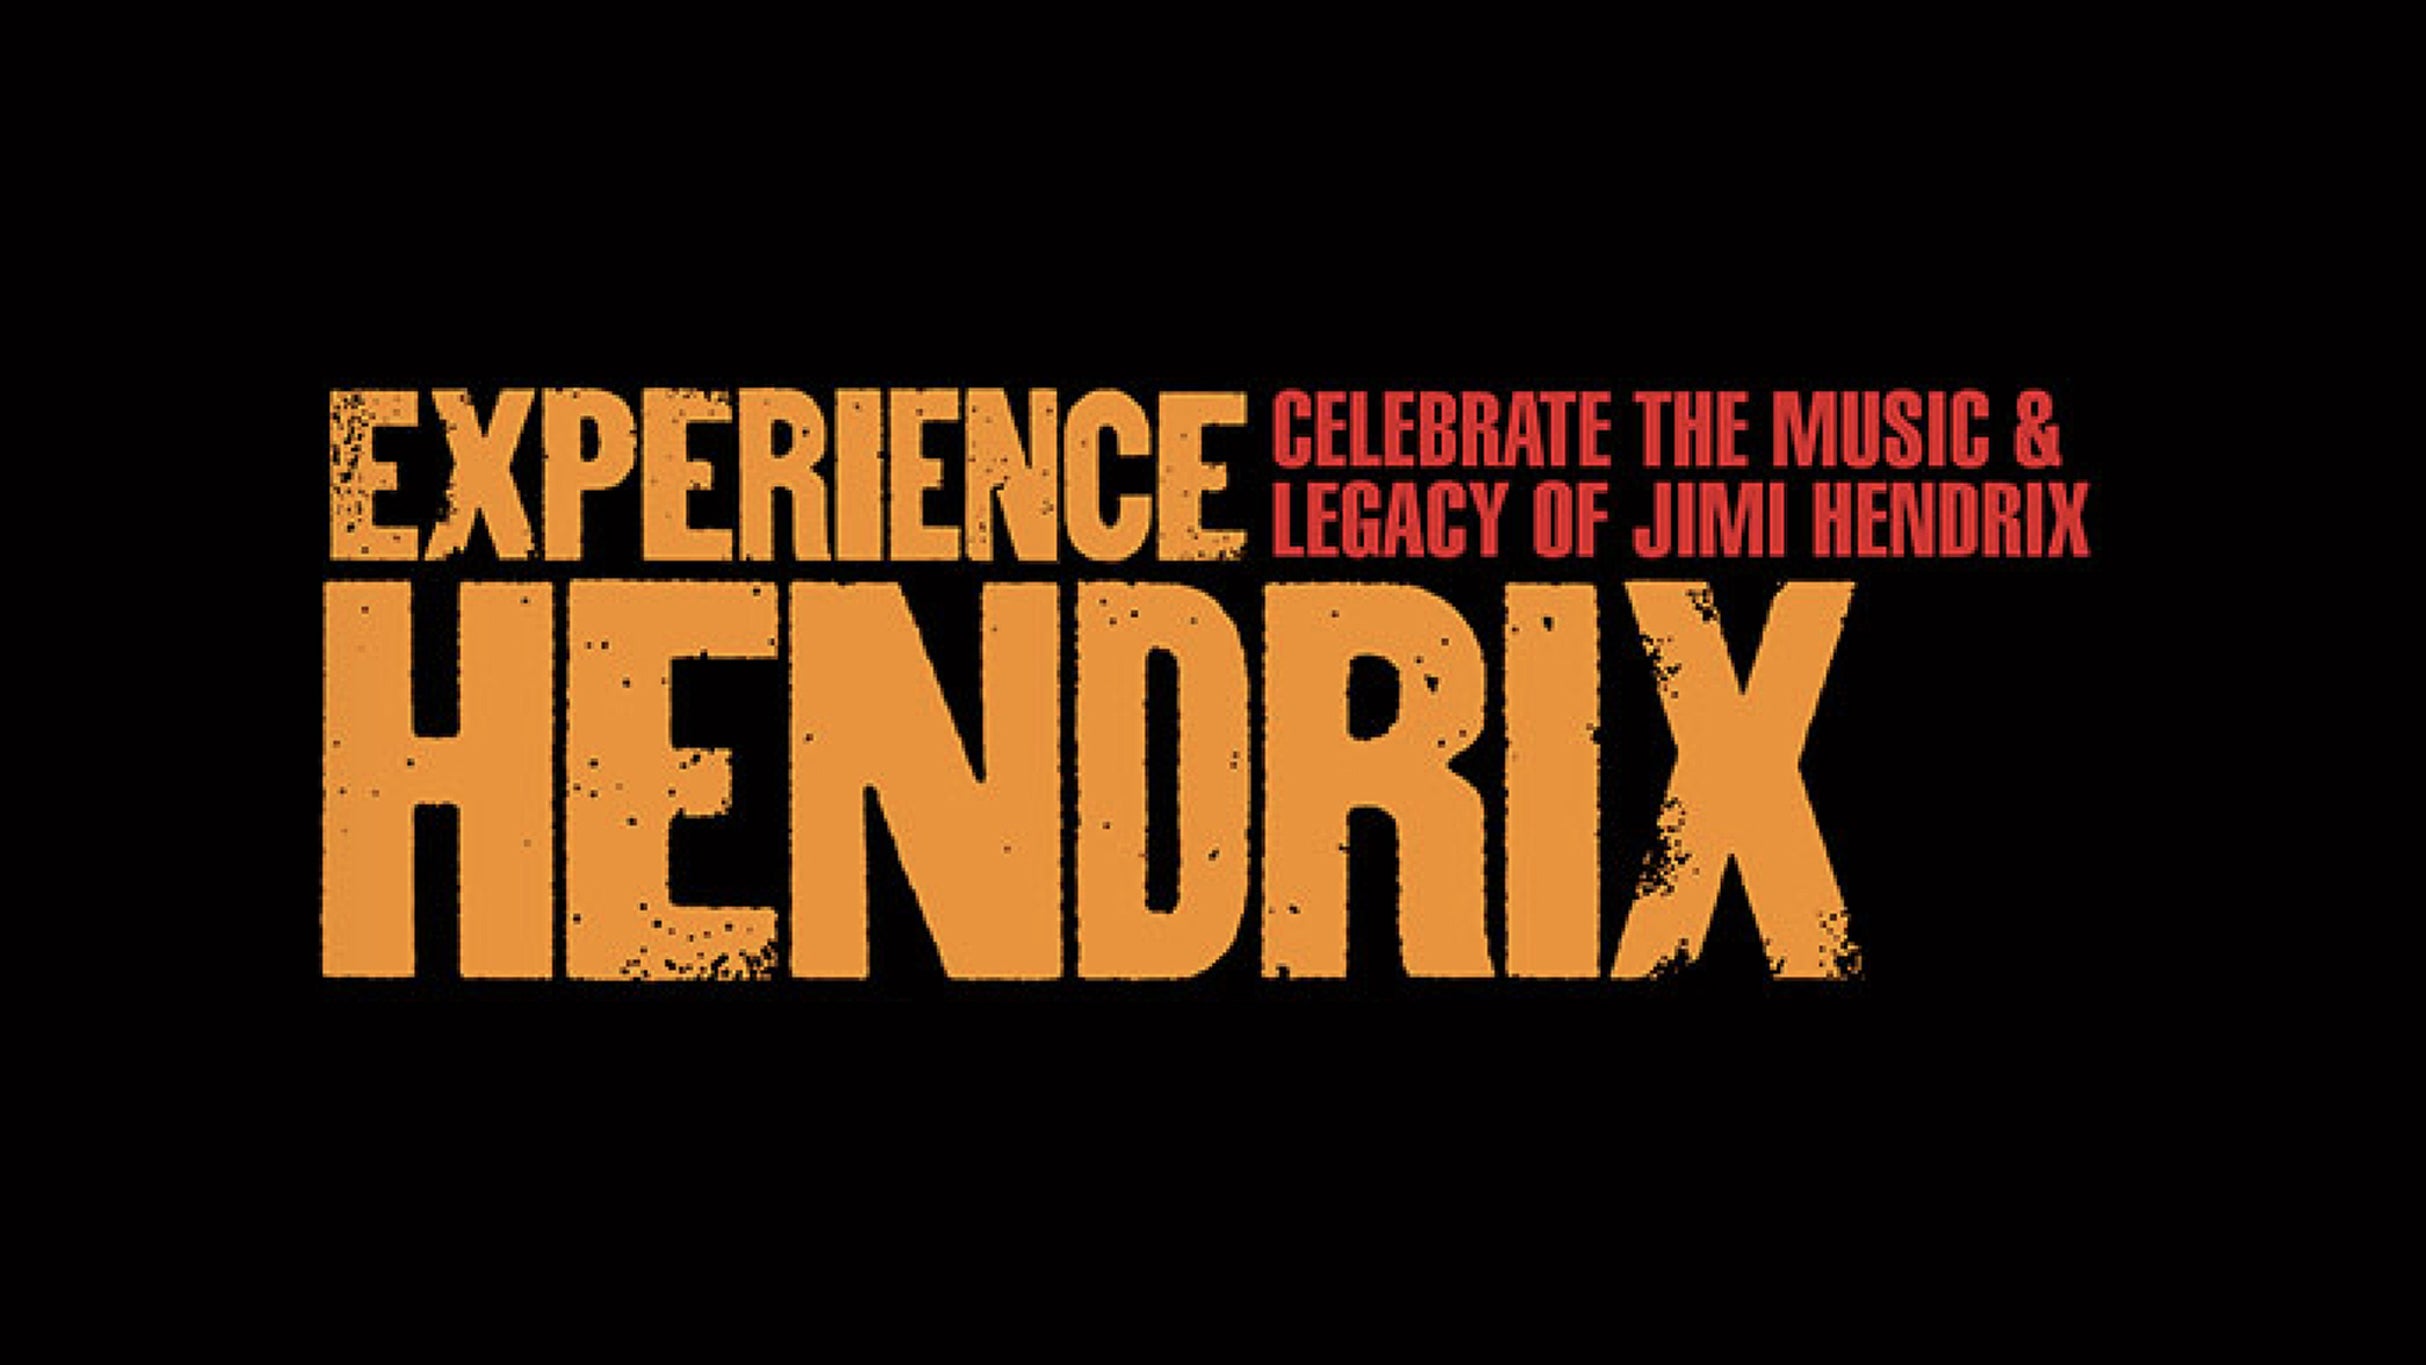 Experience Hendrix presale password for show tickets in Fort Worth, TX (Will Rogers Auditorium)